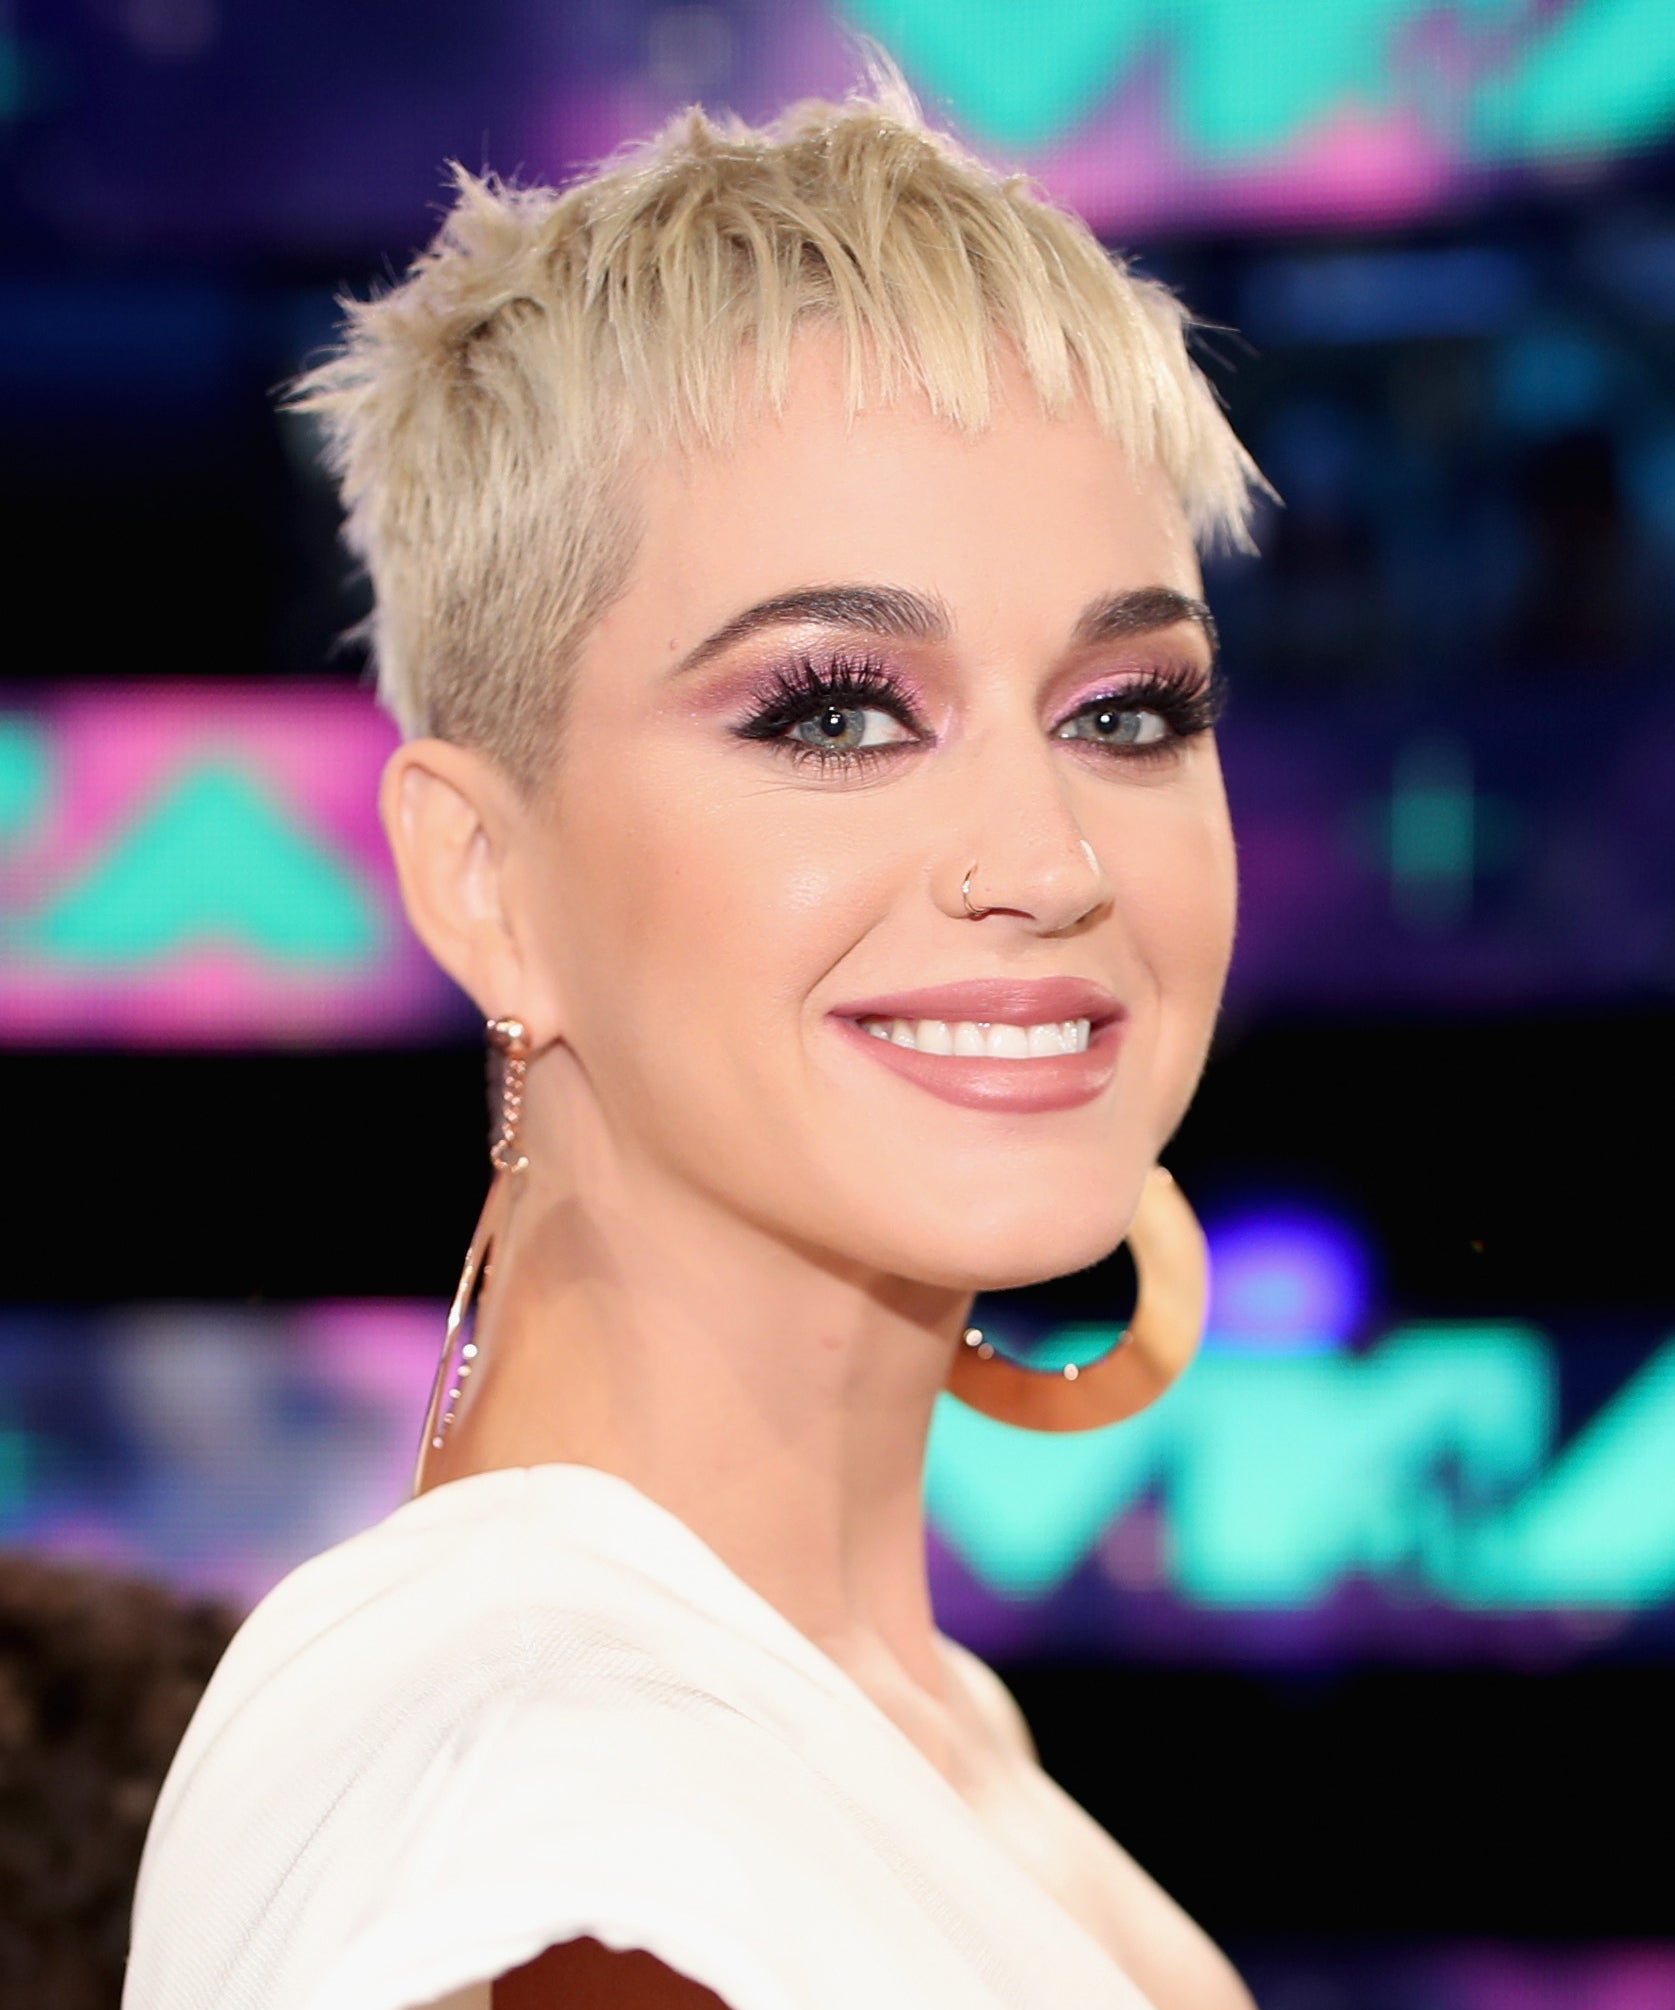 Details 80+ katy perry natural hair colour - in.eteachers